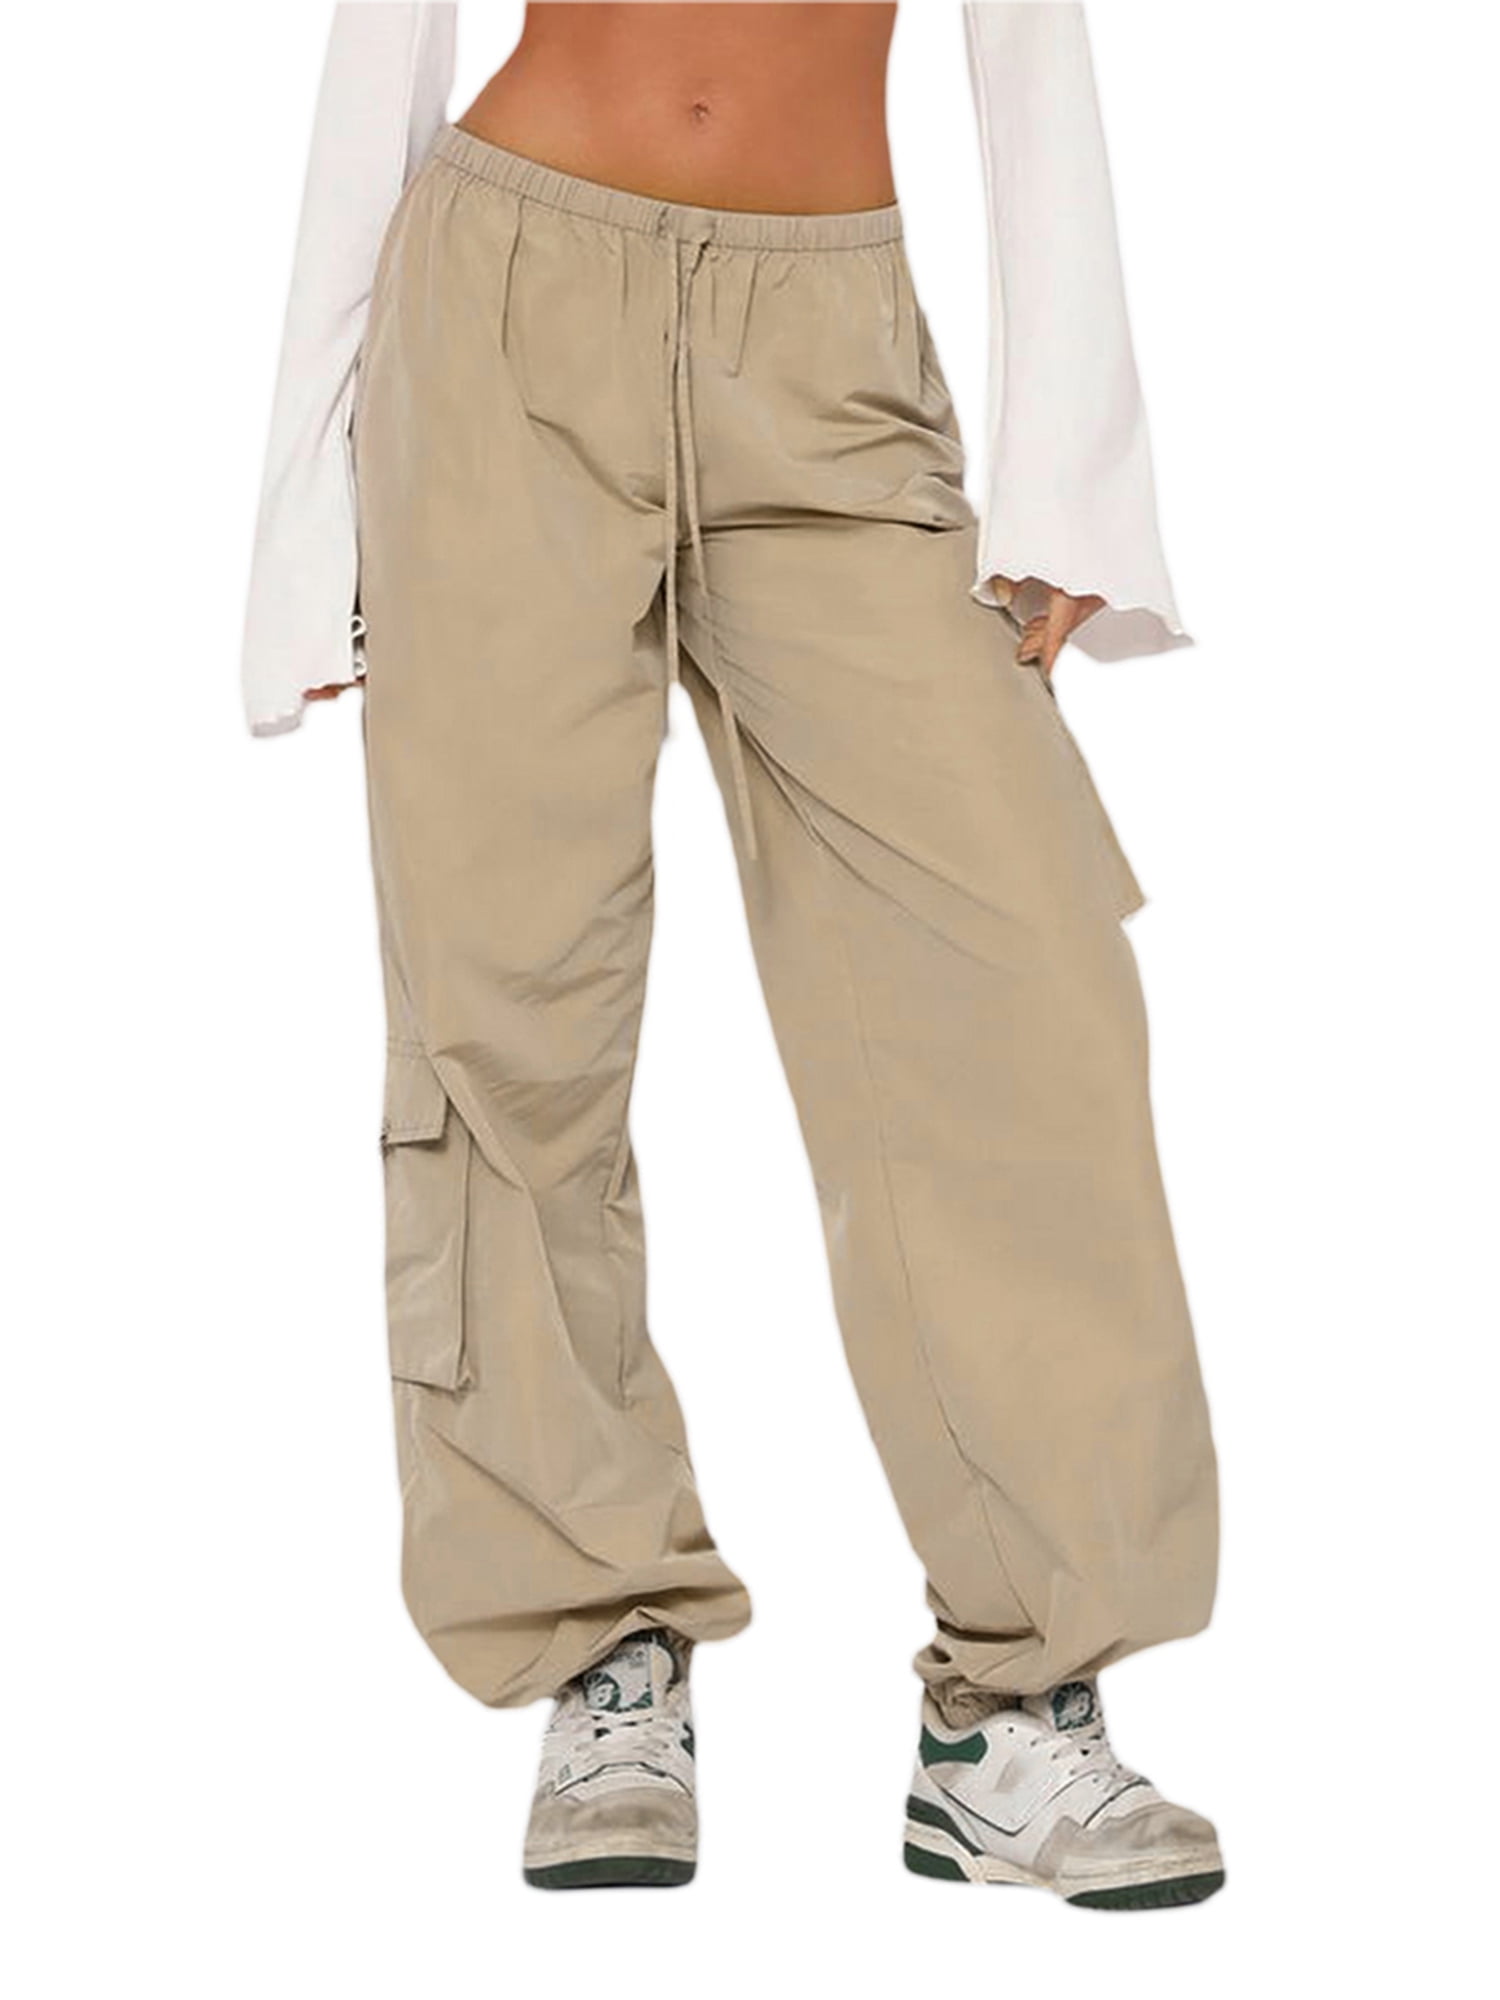 Women's Casual Loose Cargo Pants Spring Autumn Drawstring Elastic Waist  Wide-Leg Sweatpants with Multi-Pockets Joggers Trousers